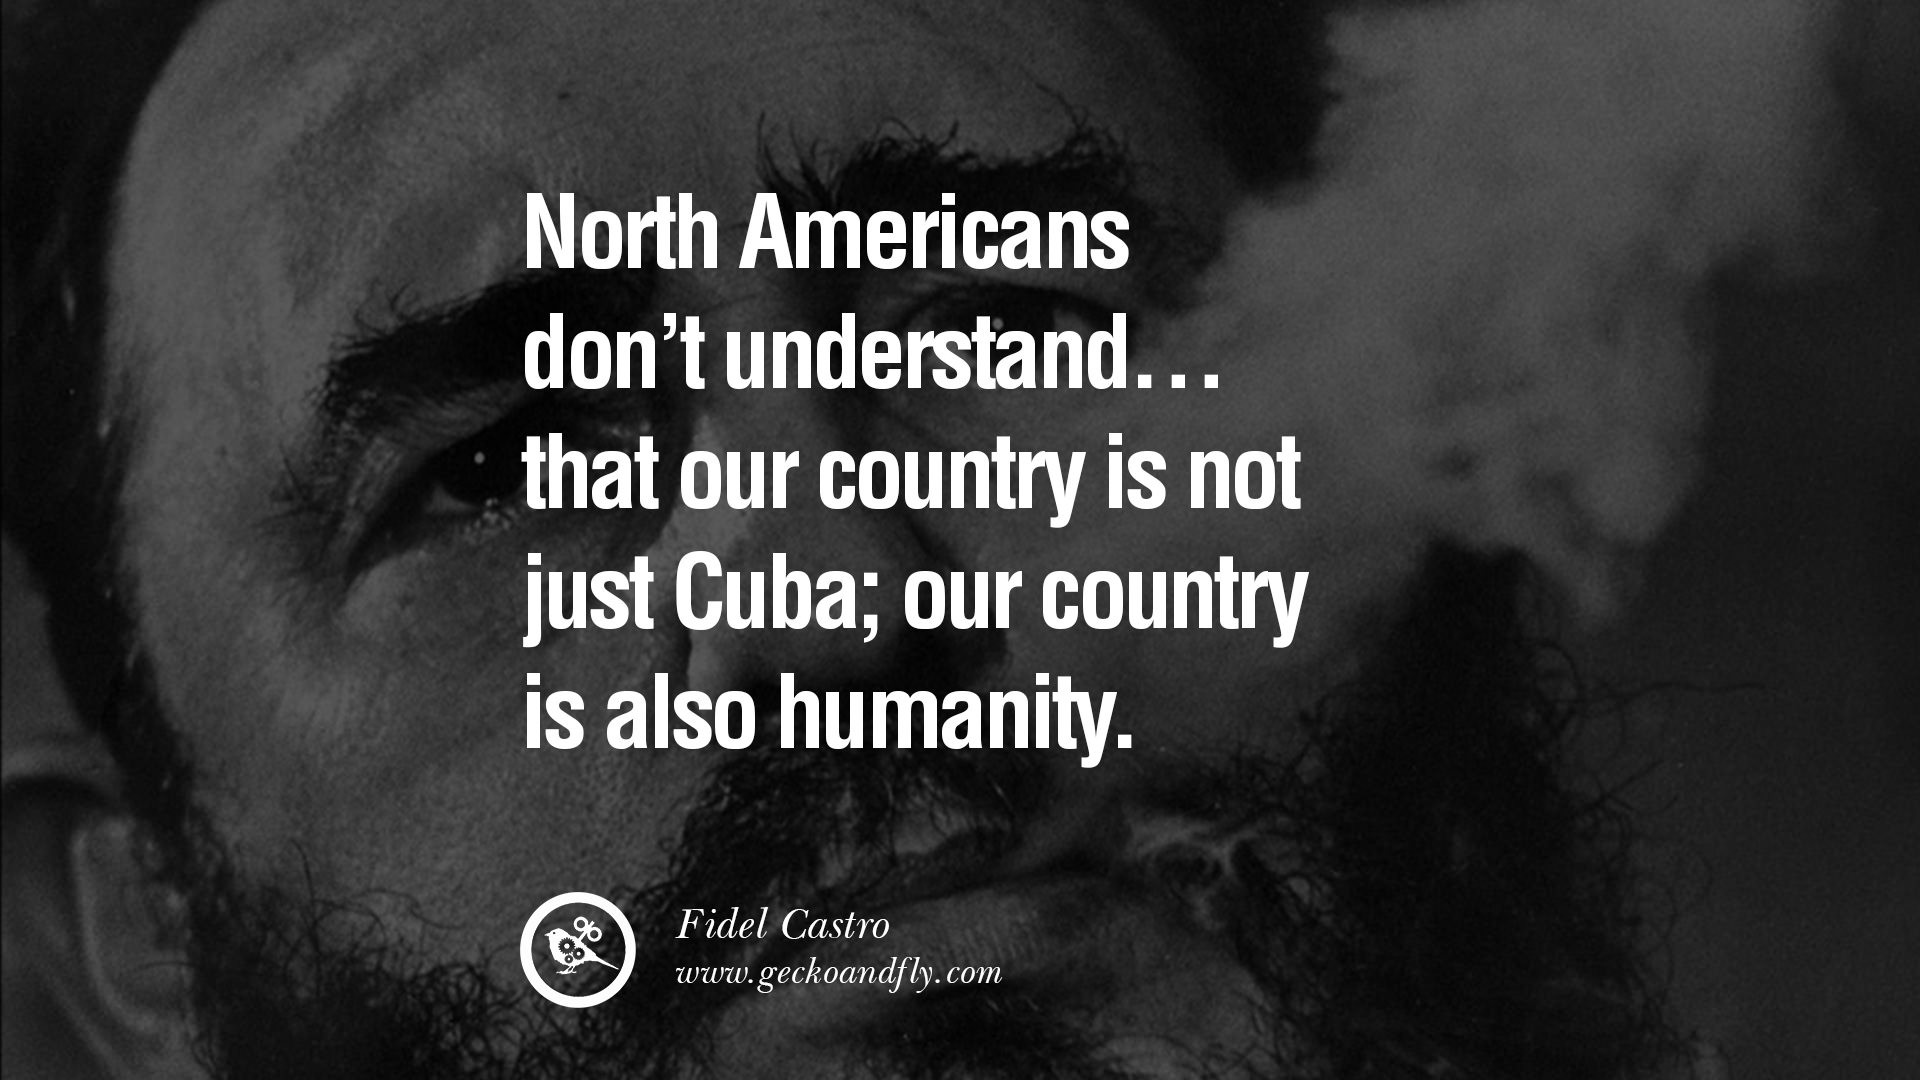 1920x1080 North Americans don't understand... that our country is not just Cuba